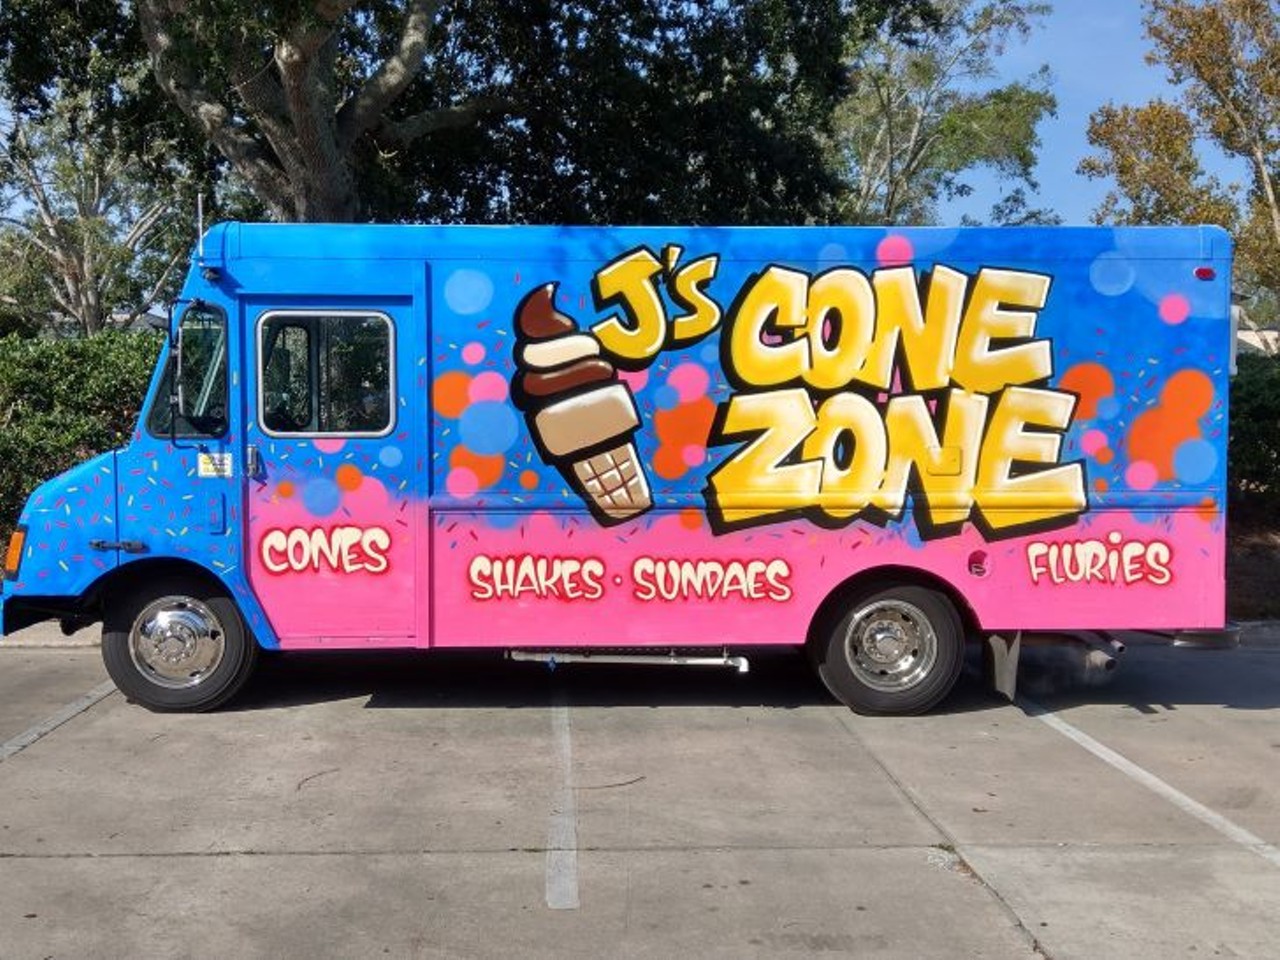 J&#146;s Cone Zone 
Ice Cream Truck
The ice cream truck may be a classic, but J&#146;s Cone Zone definitely brings more style to the game. Available to cater parties and events in the Orlando area. 
Photo via J&#146;s Cone Zone/Facebook